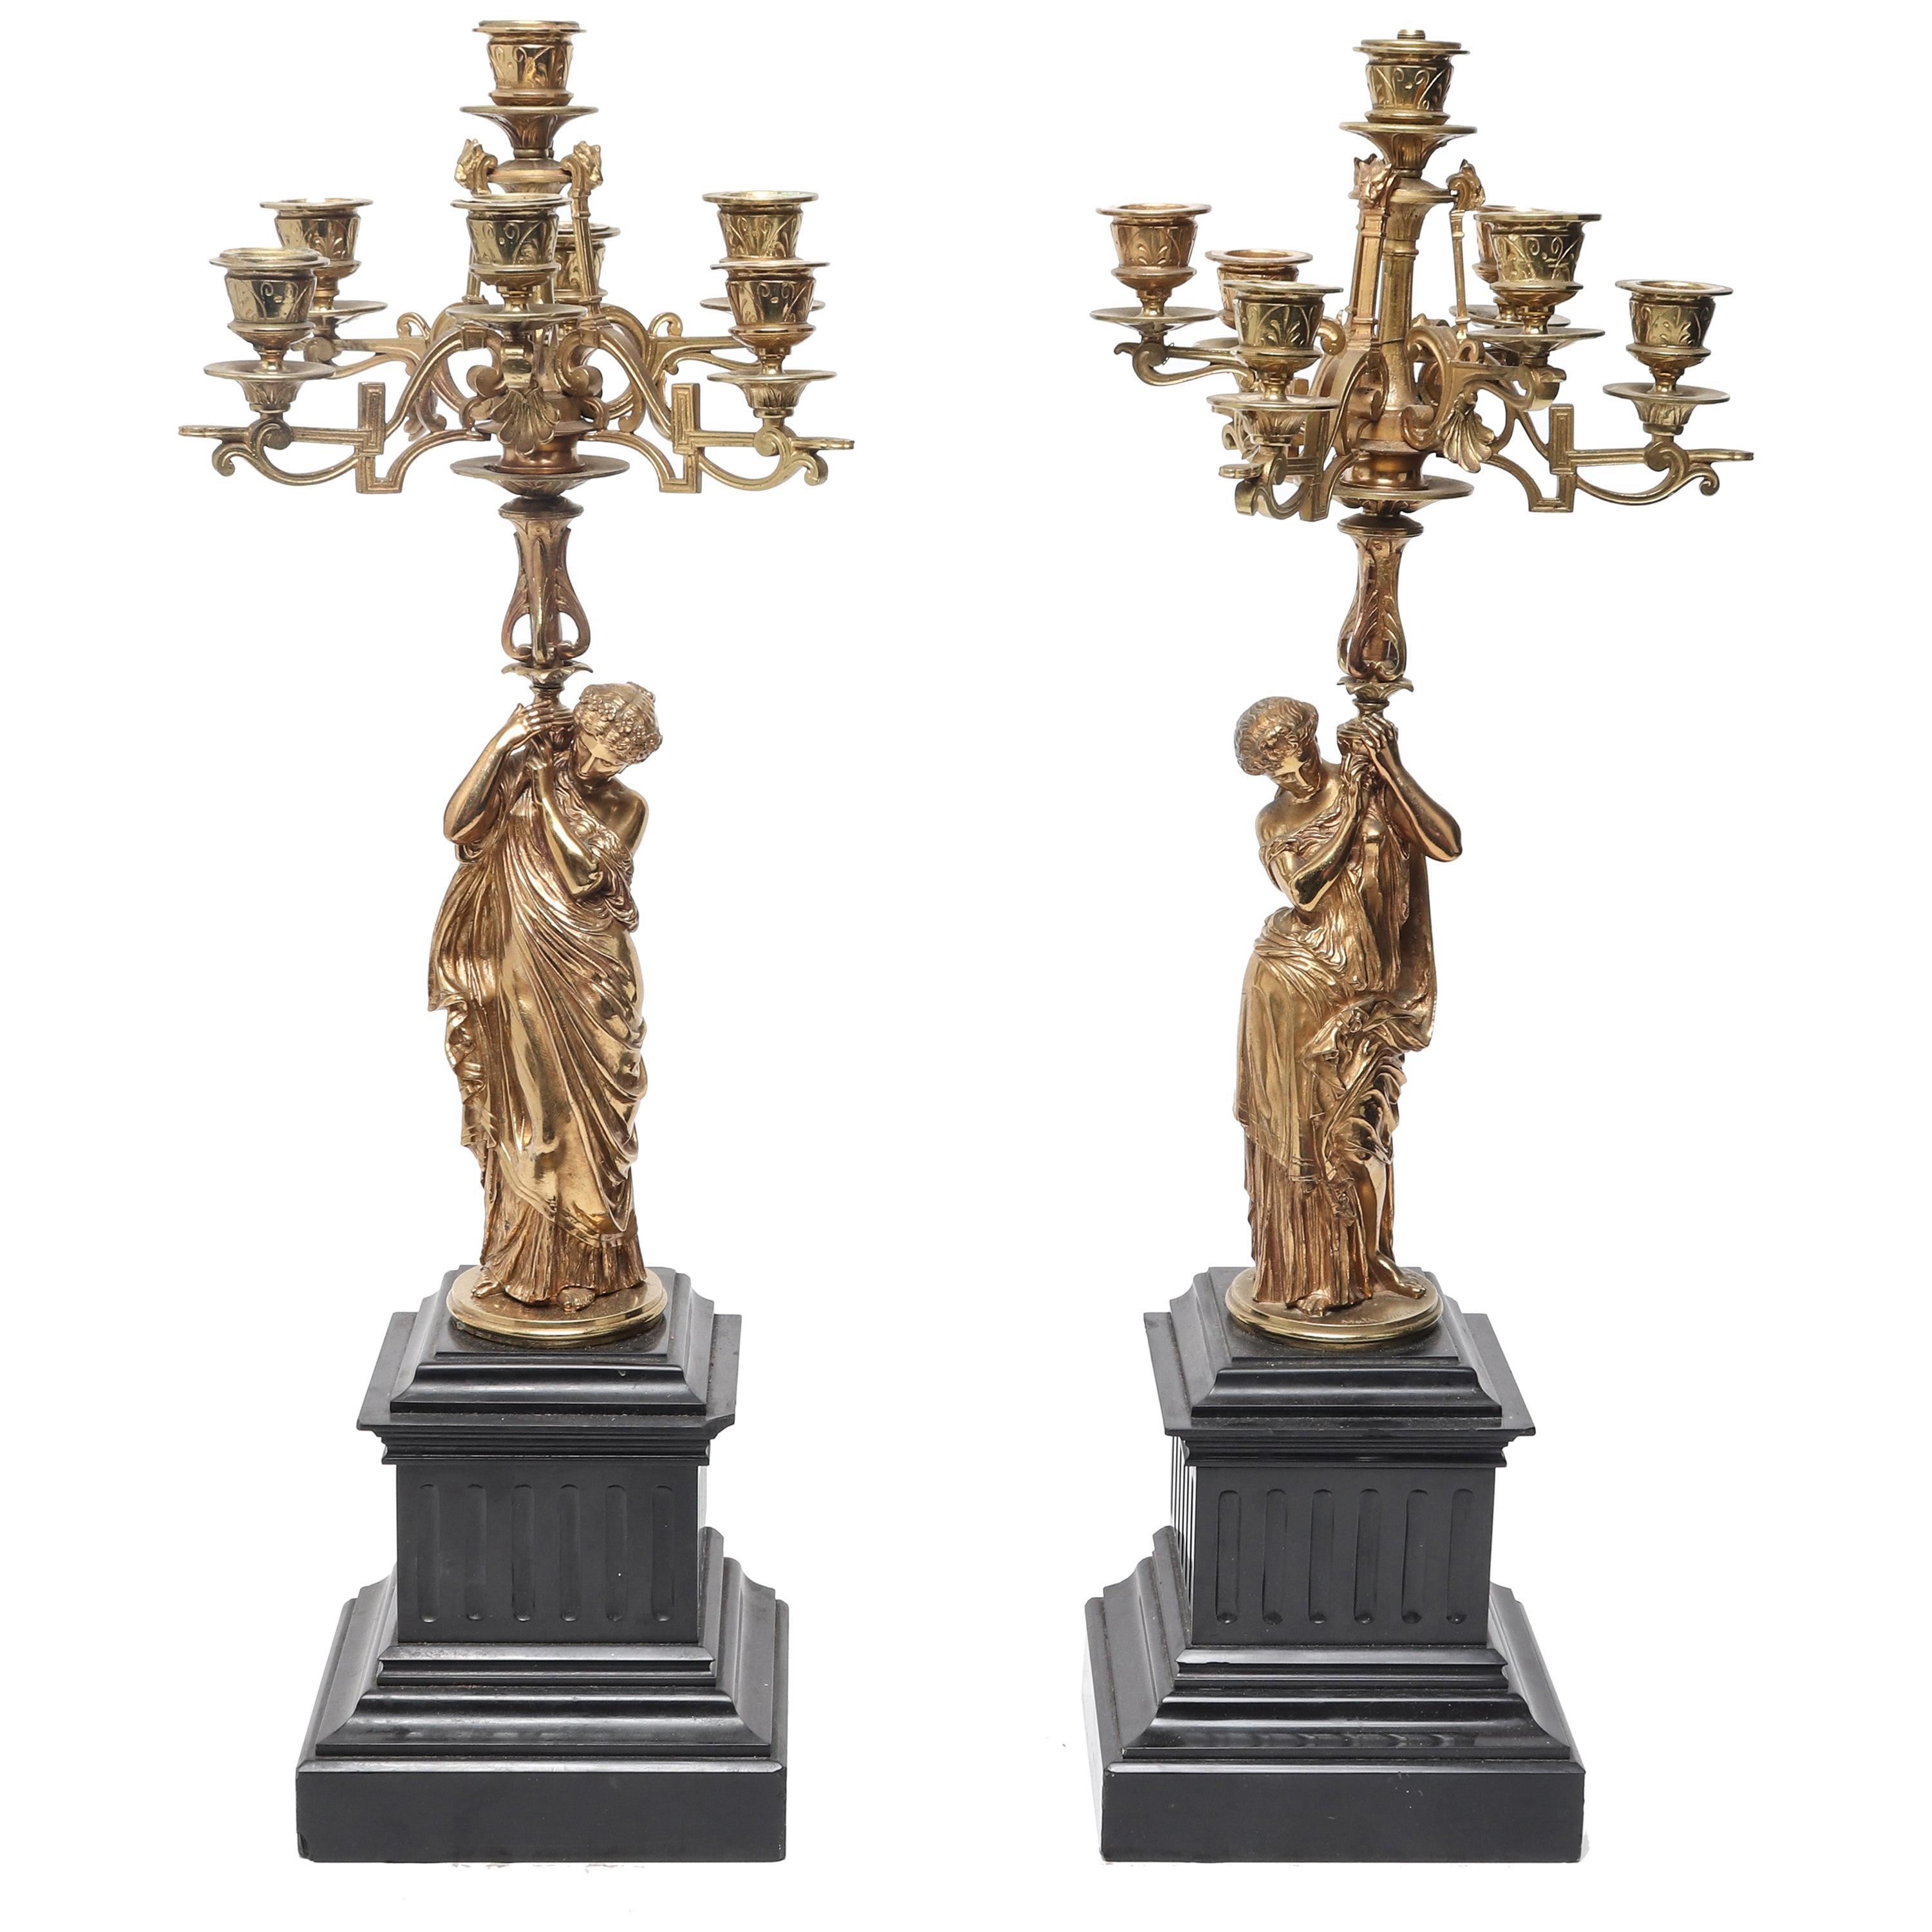 French Neoclassical Style Figural Ormolu Candelabras after Mathurin Moreau